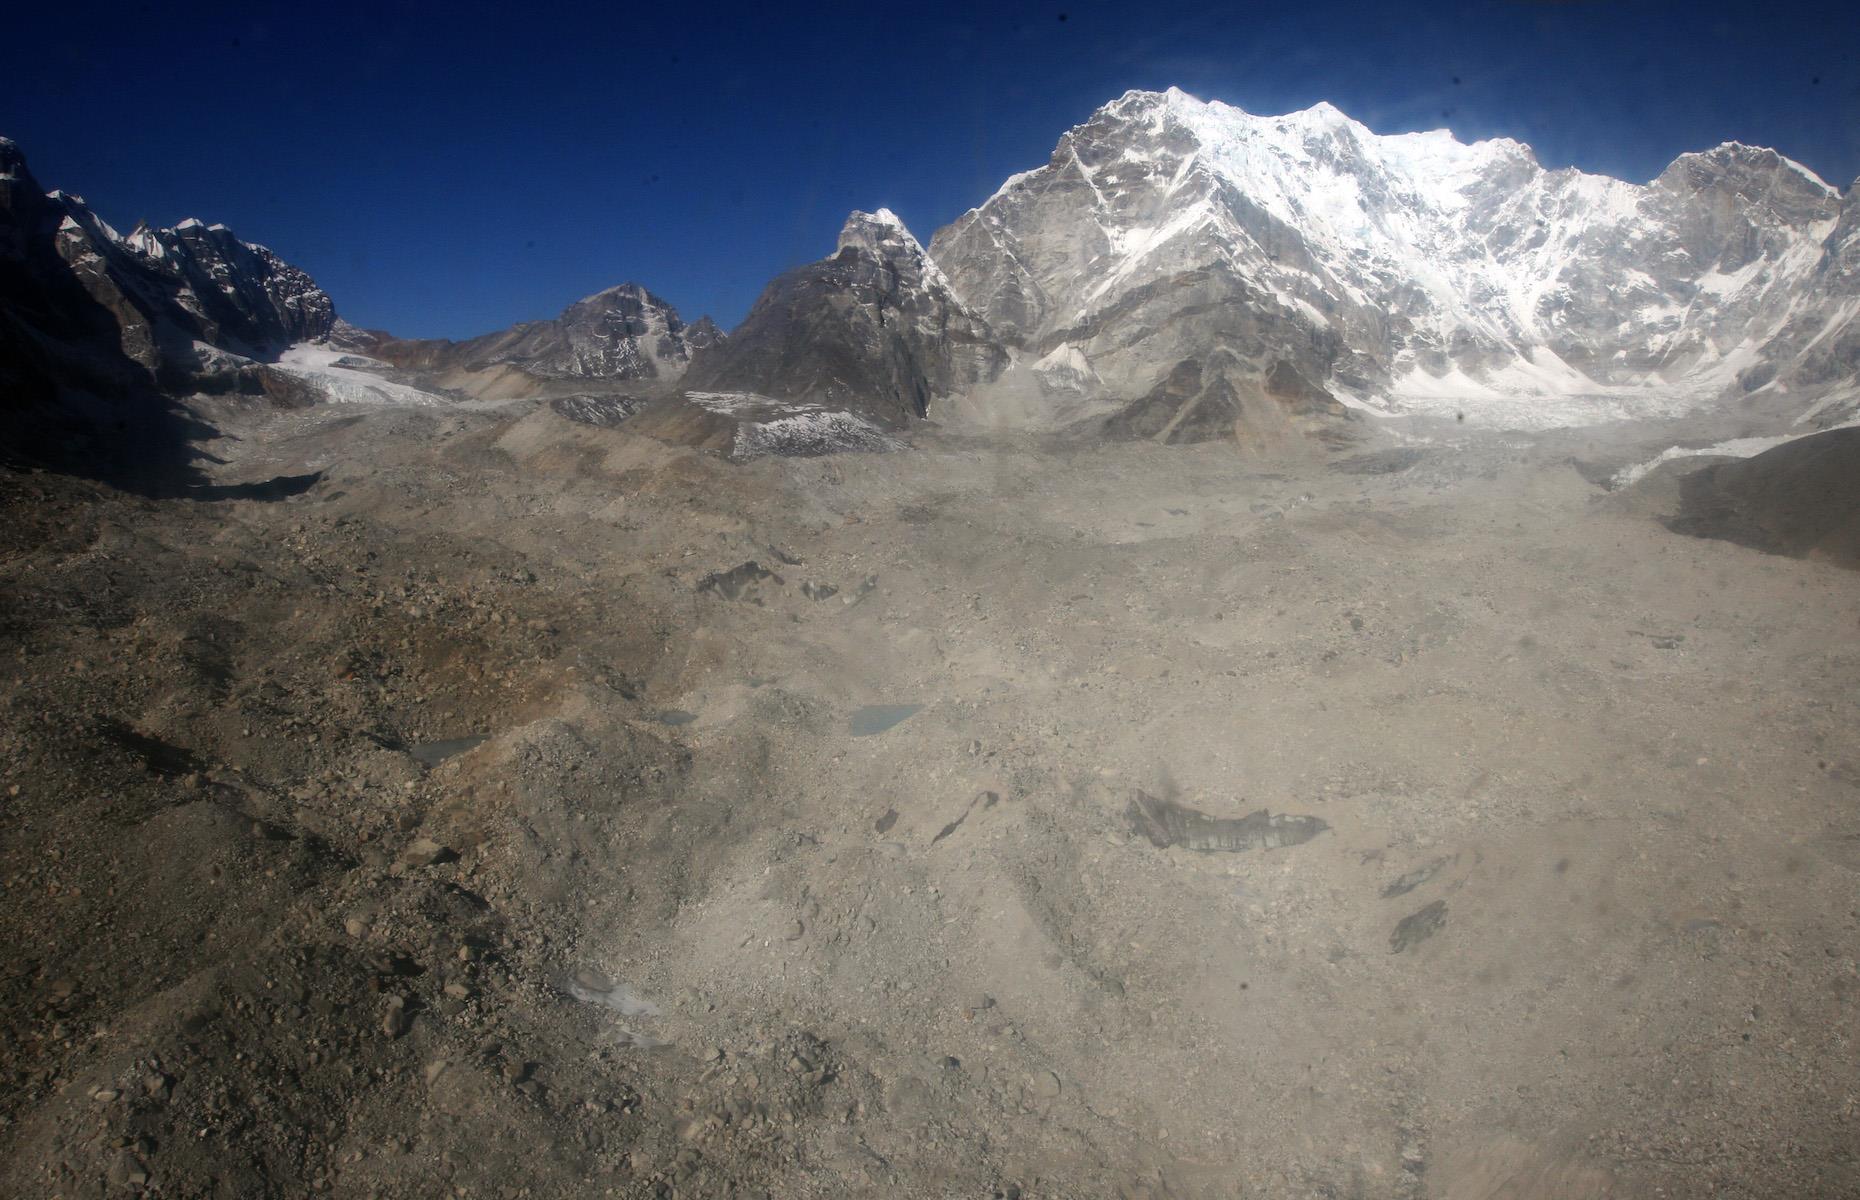 <p>The loss of glaciers will have a devastating effect, including leading to landslides, flash floods and erosion, and will also impact water supplies in the long term. The glaciers are a critical water source for 250 million people who live in the Hindu Kush Himalayan region, which goes across Afghanistan, Bangladesh, Bhutan, China, India, Myanmar, Nepal and Pakistan.</p>